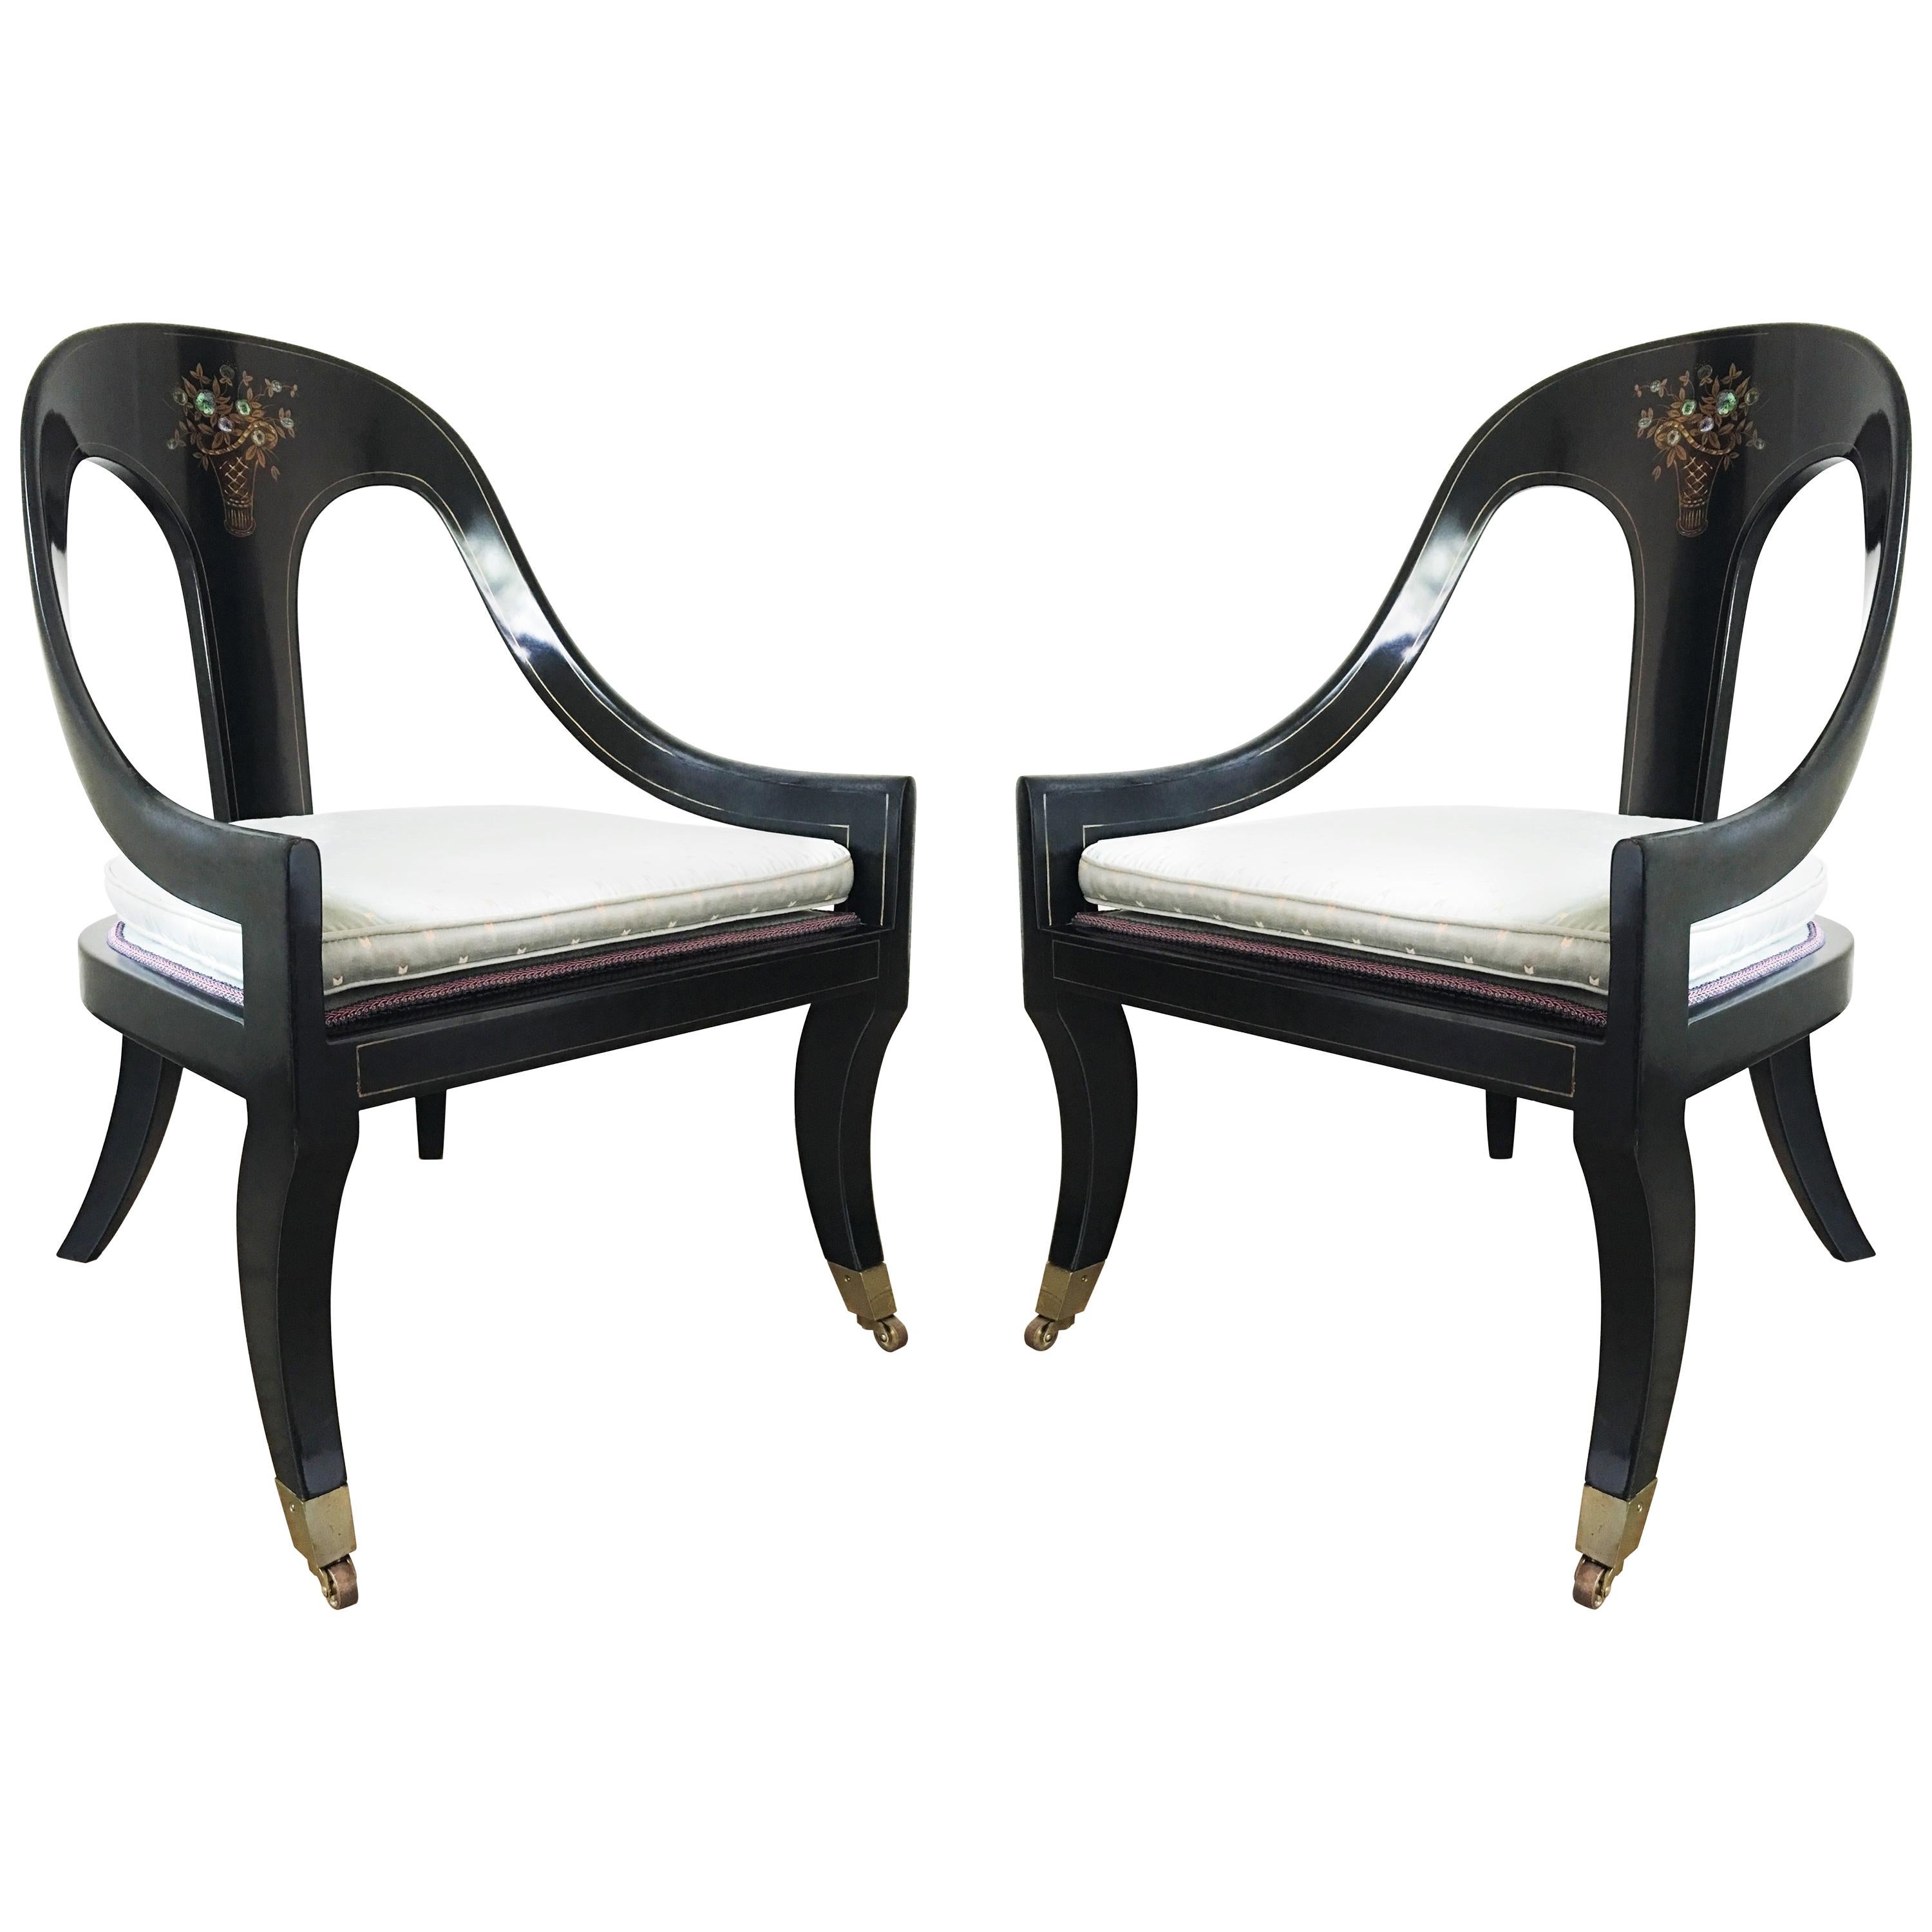 Pair of Lacquered and Mother of Pearl Inlaid Spoon Back Chairs